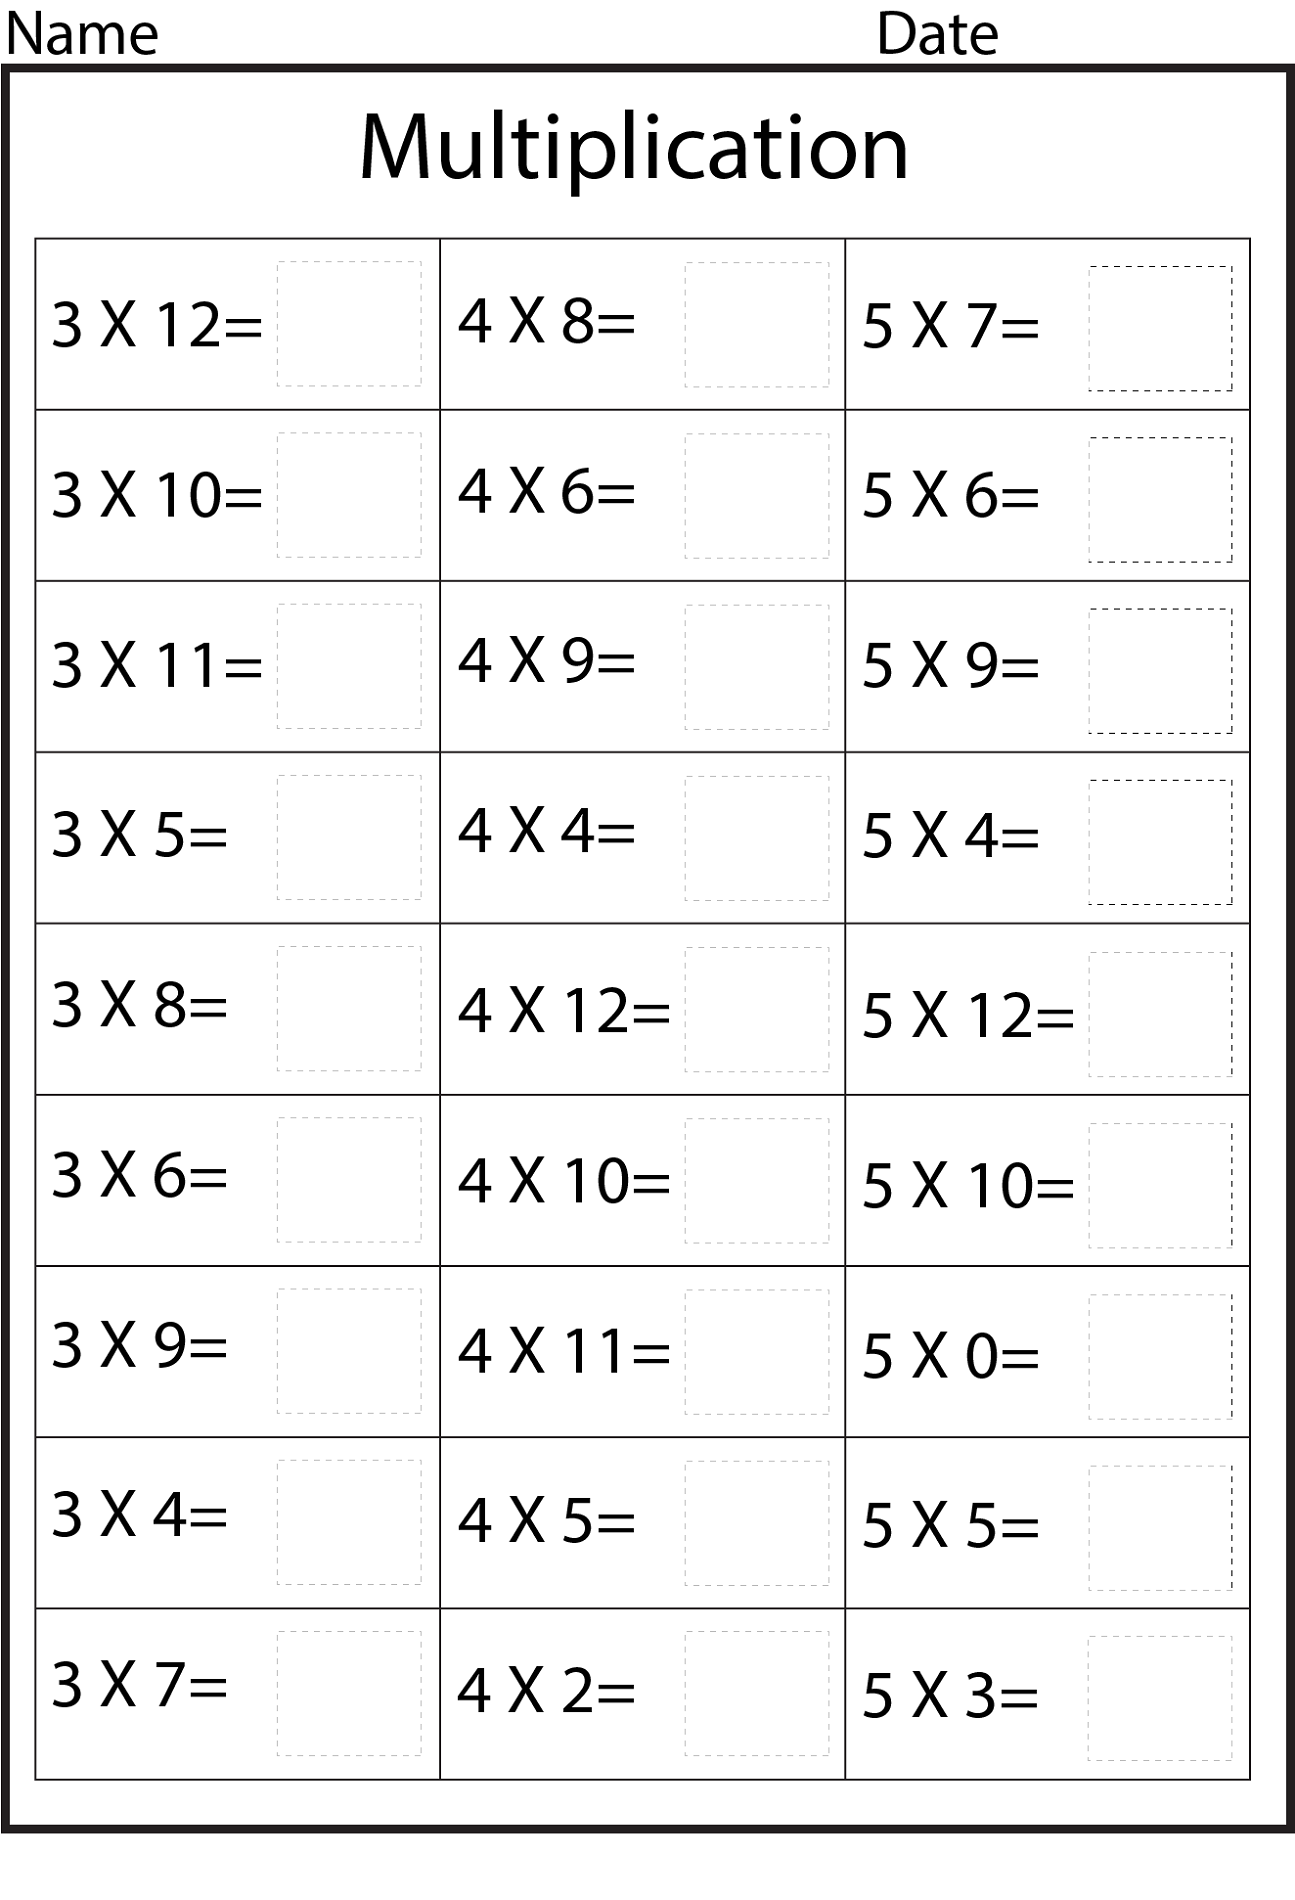 3 times table multiplication worksheets